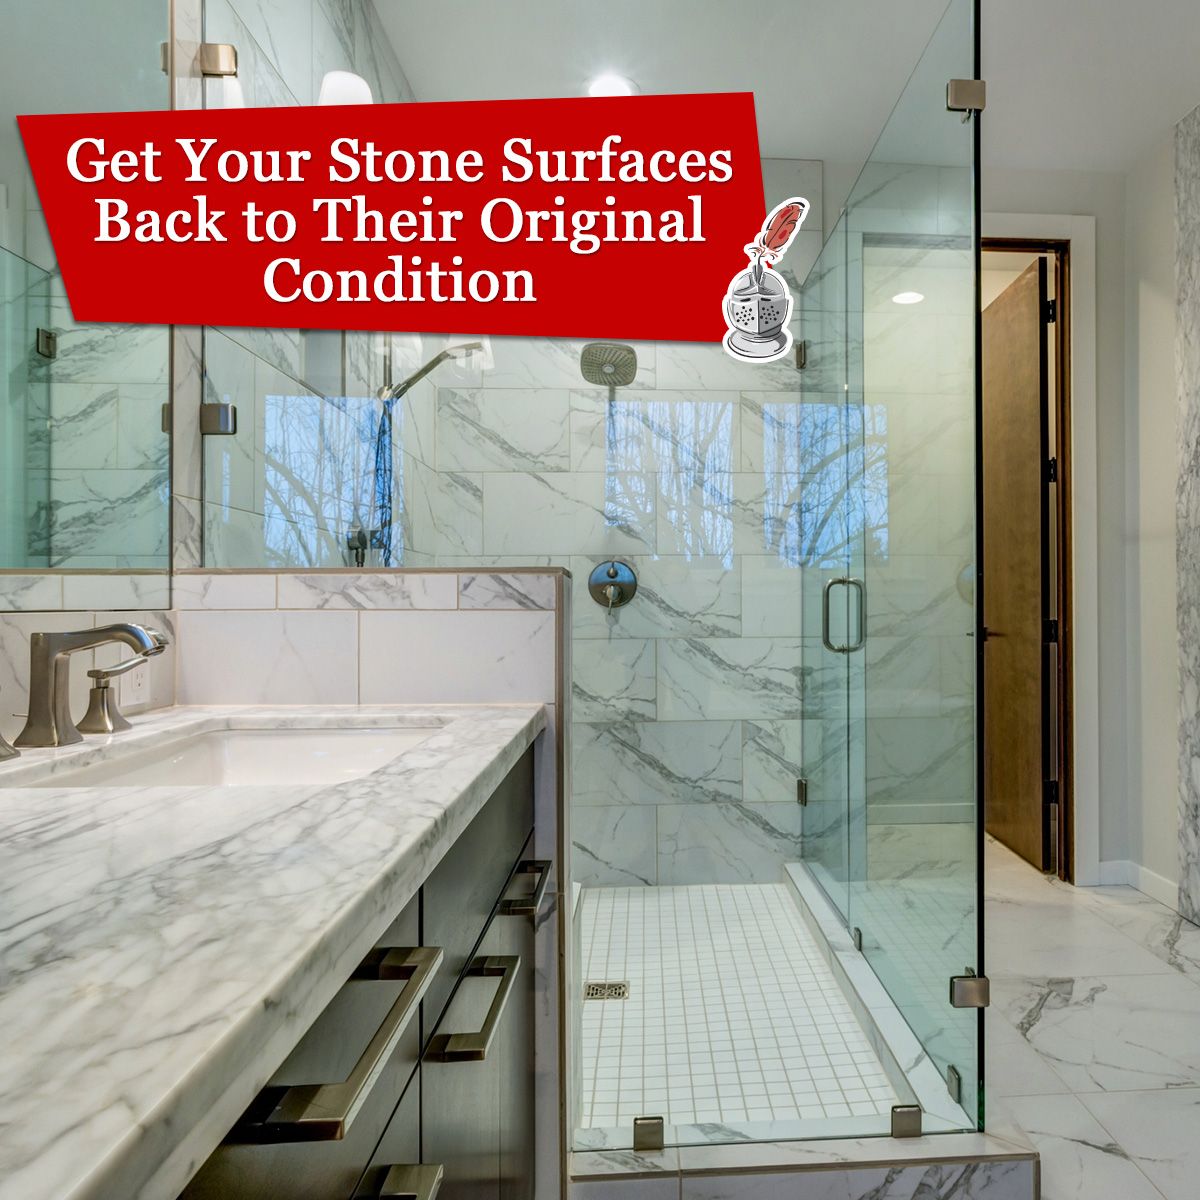 Get Your Stone Surfaces Back to Their Original Condition